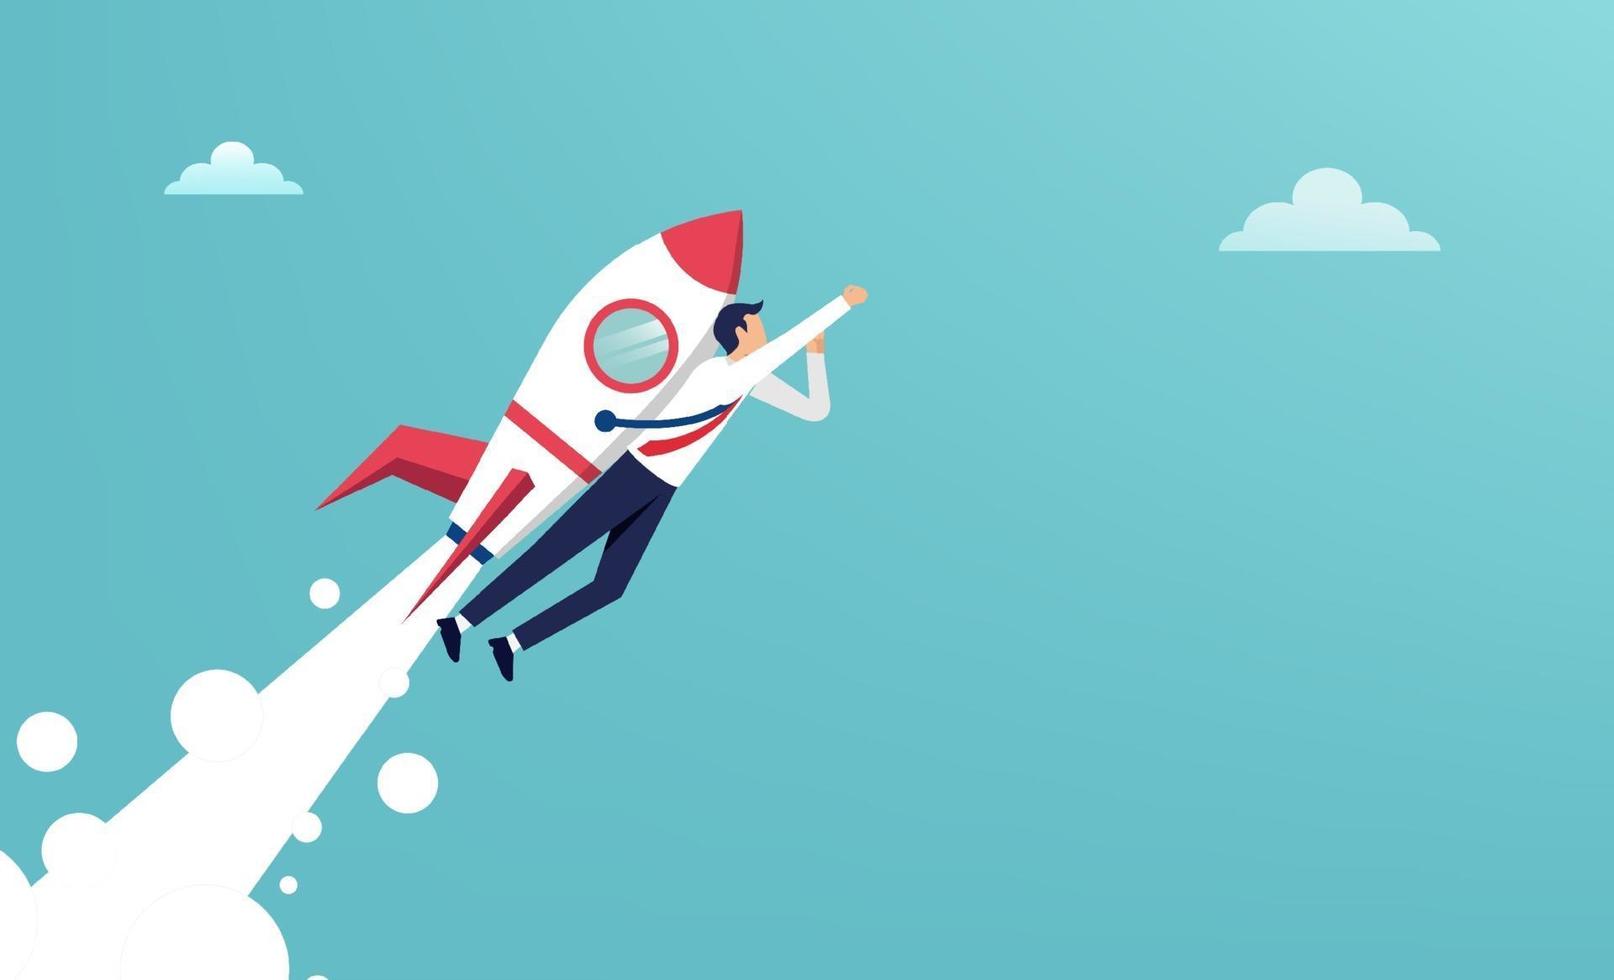 Businessman flying with jet pack illustration. Success in business and career concept vector